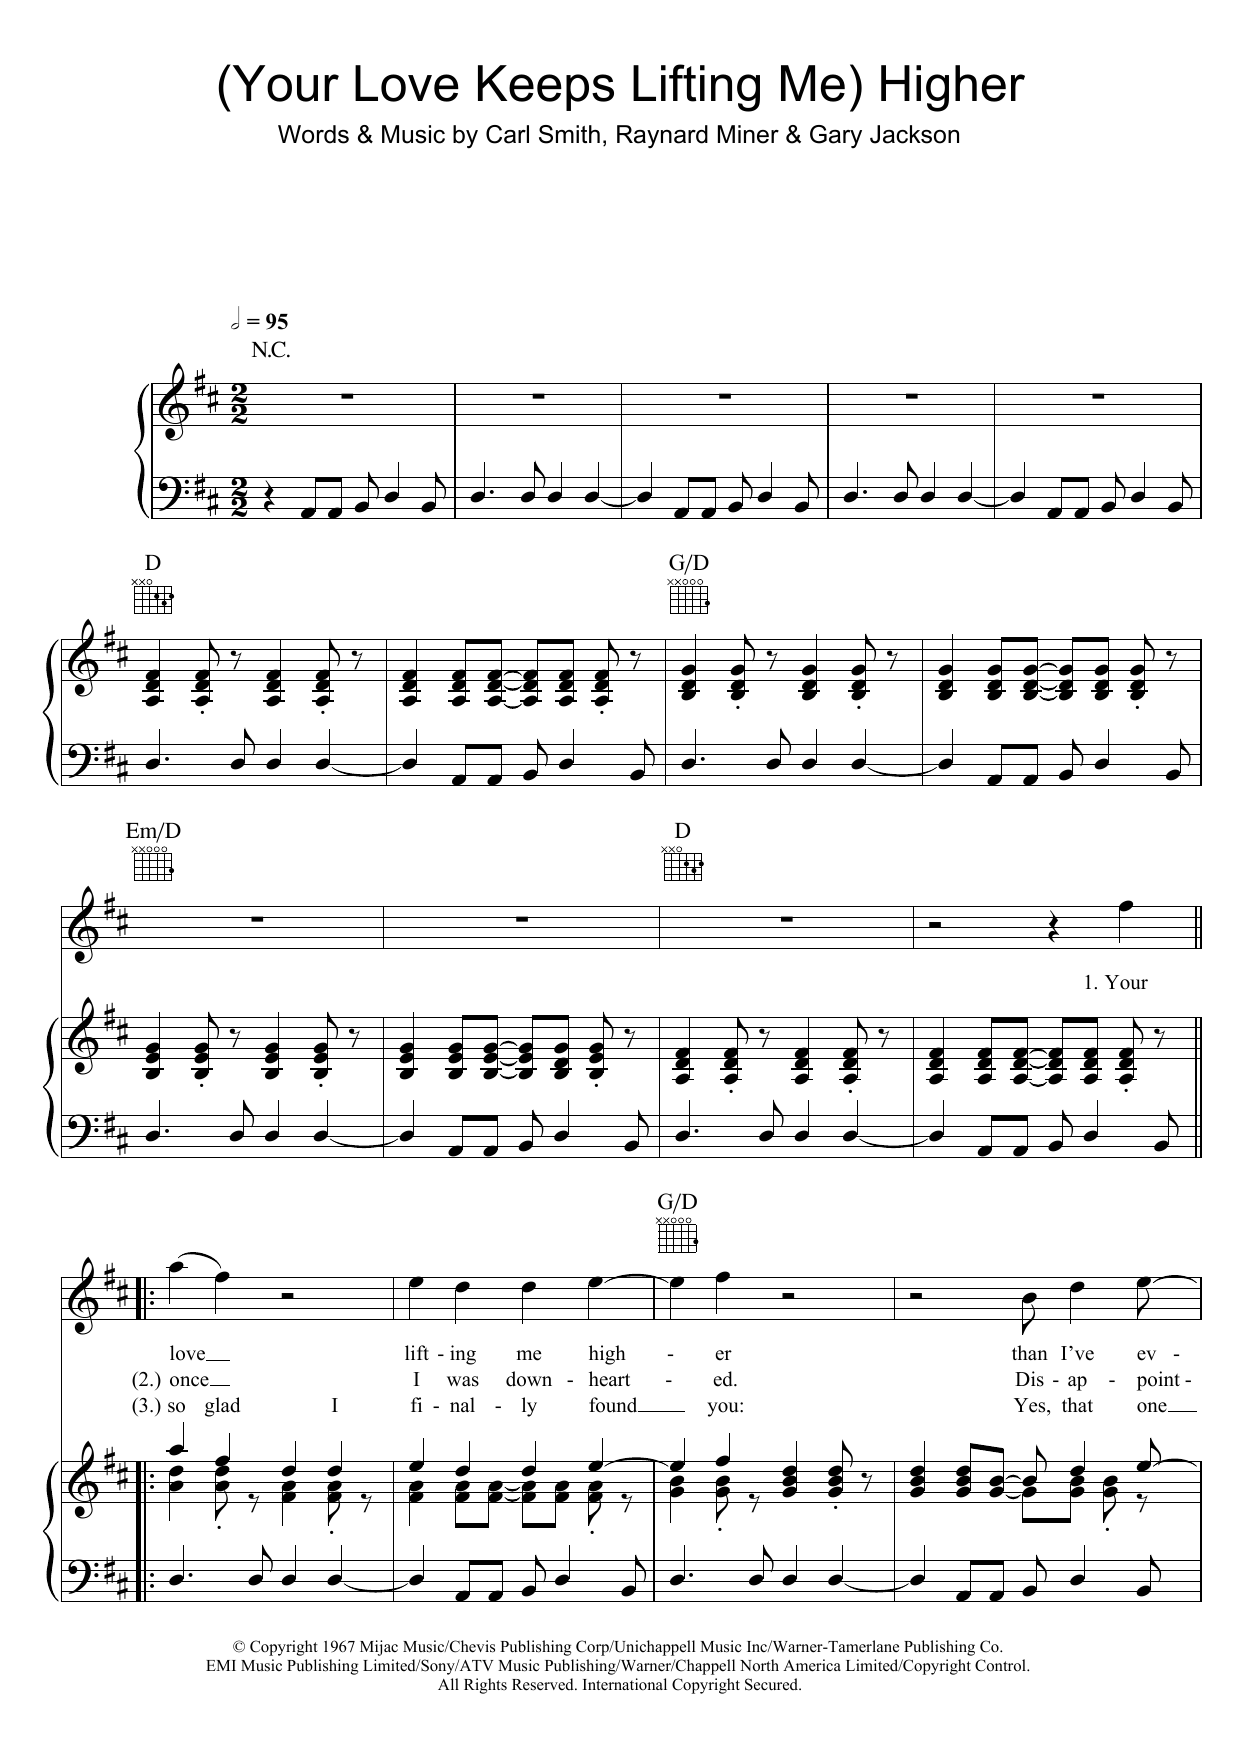 Download Jackie Wilson (Your Love Keeps Lifting Me) Higher And Sheet Music